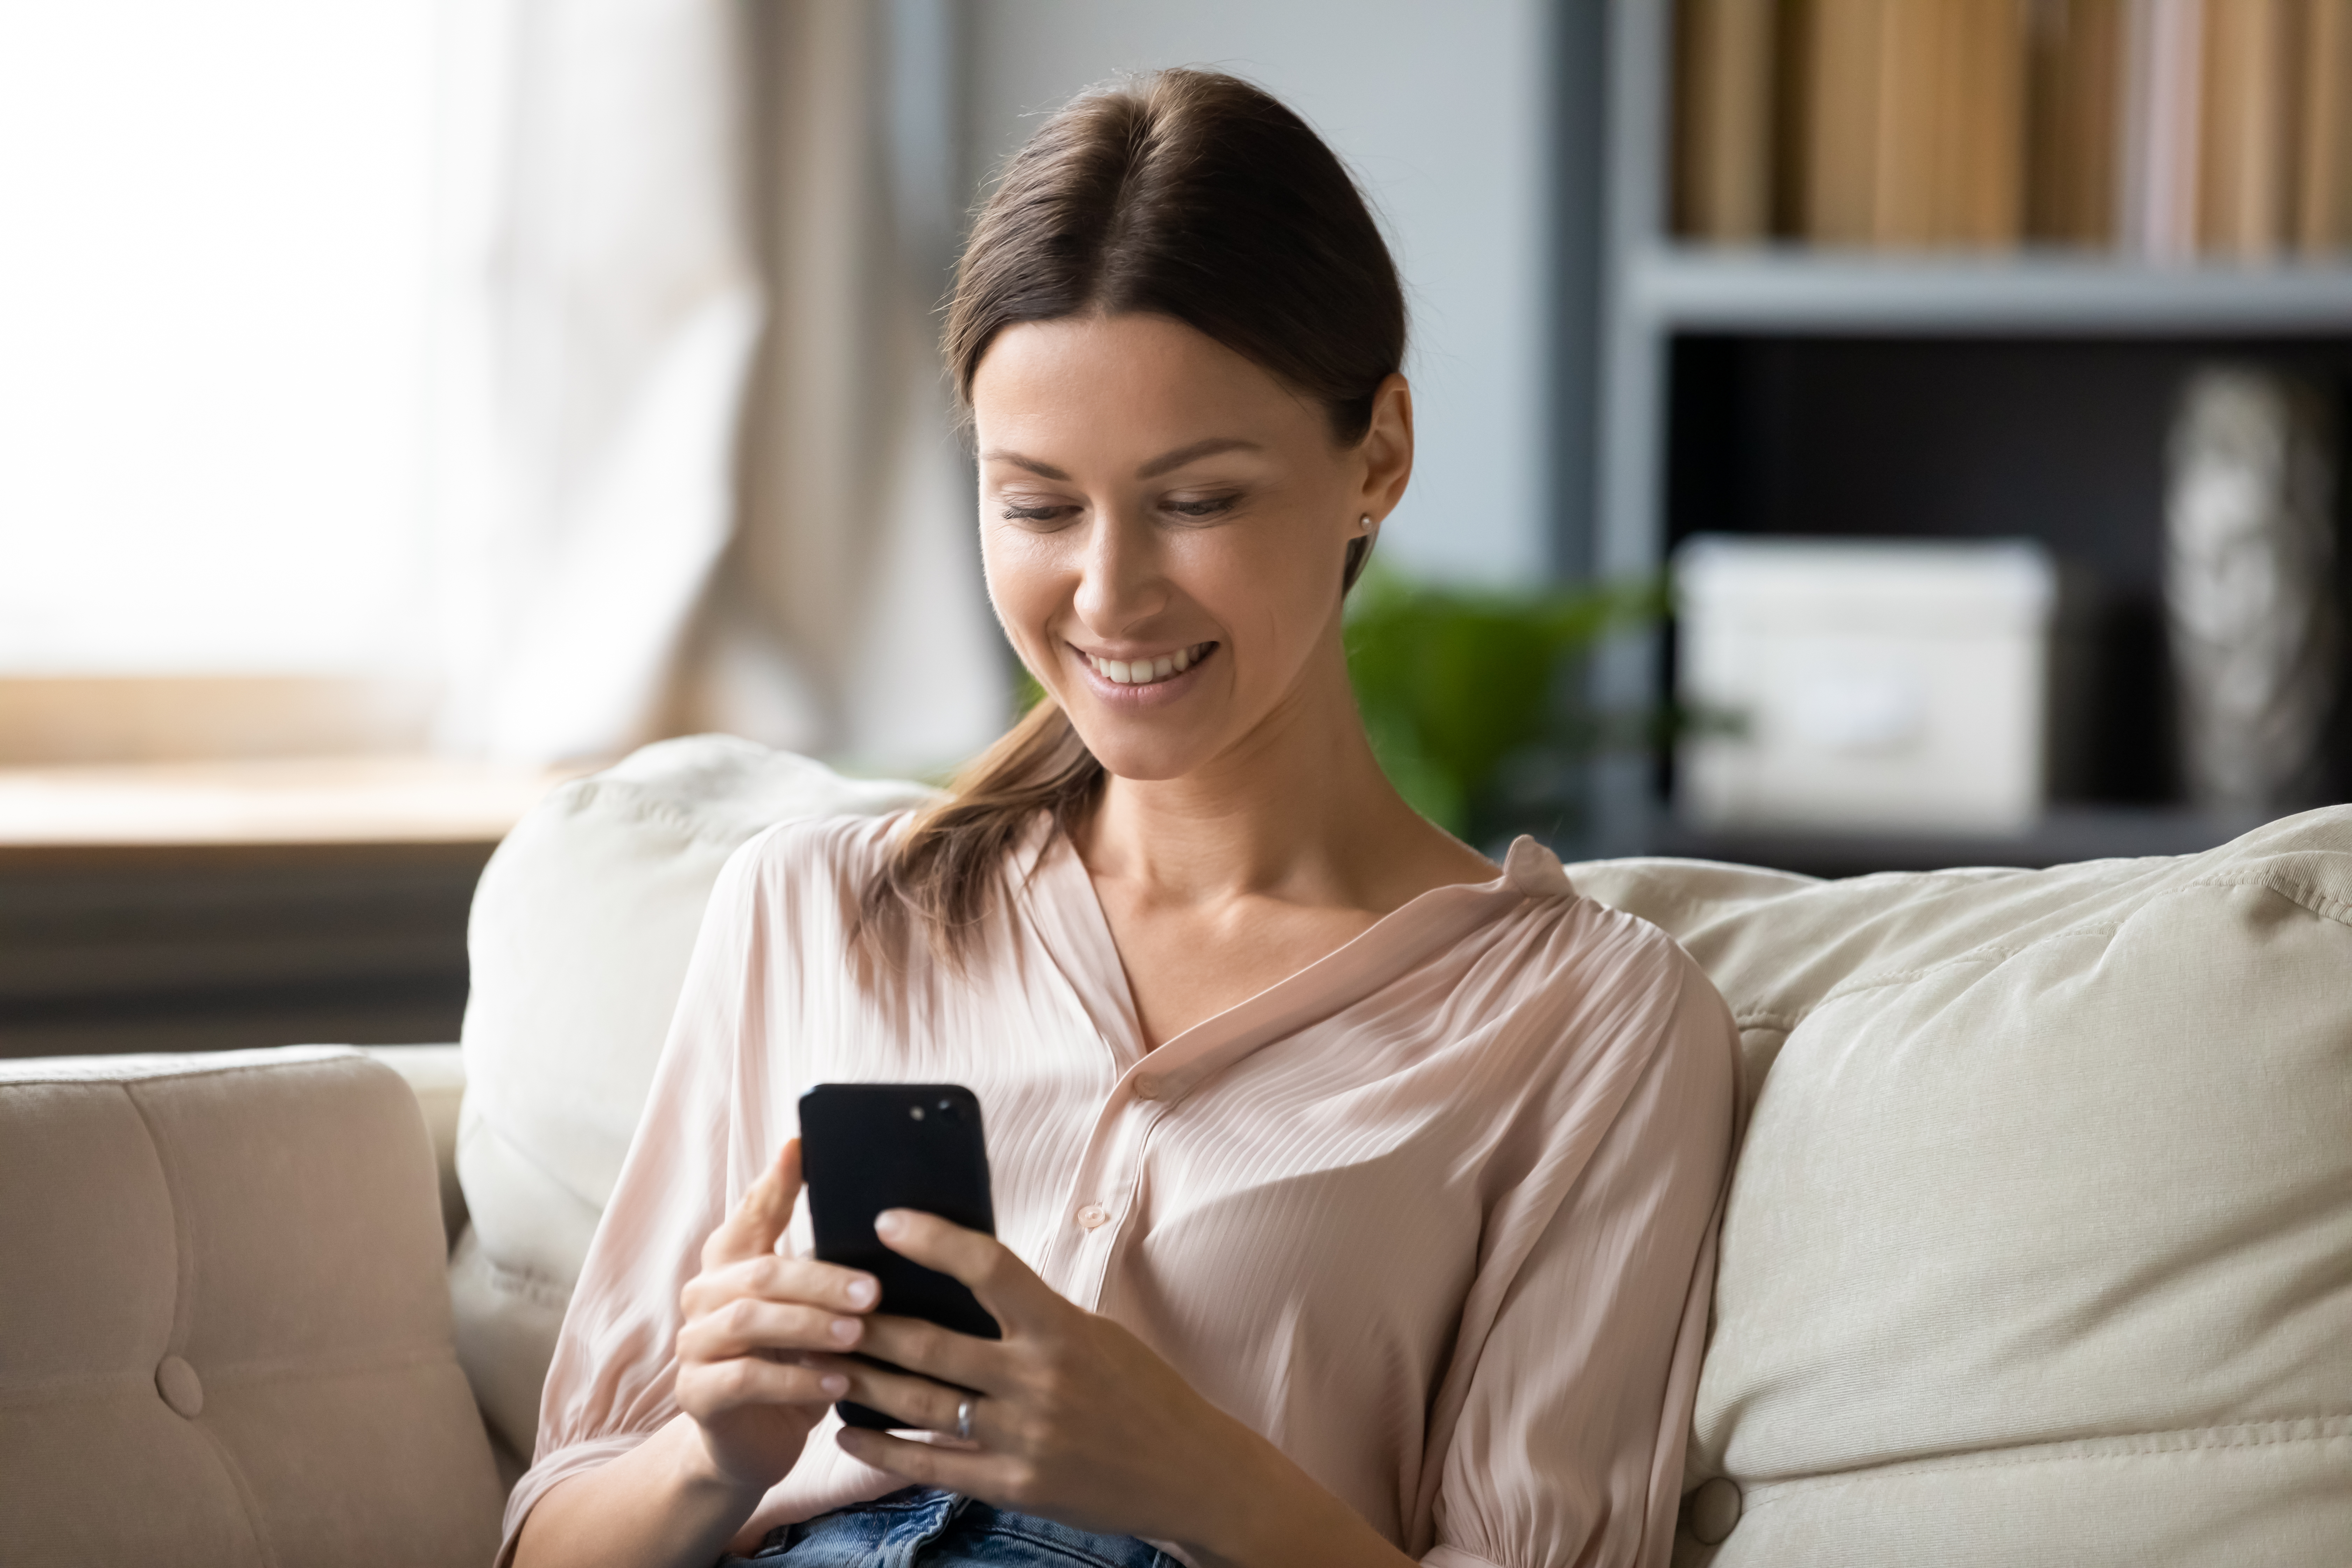 Woman on mobile phone, smiling